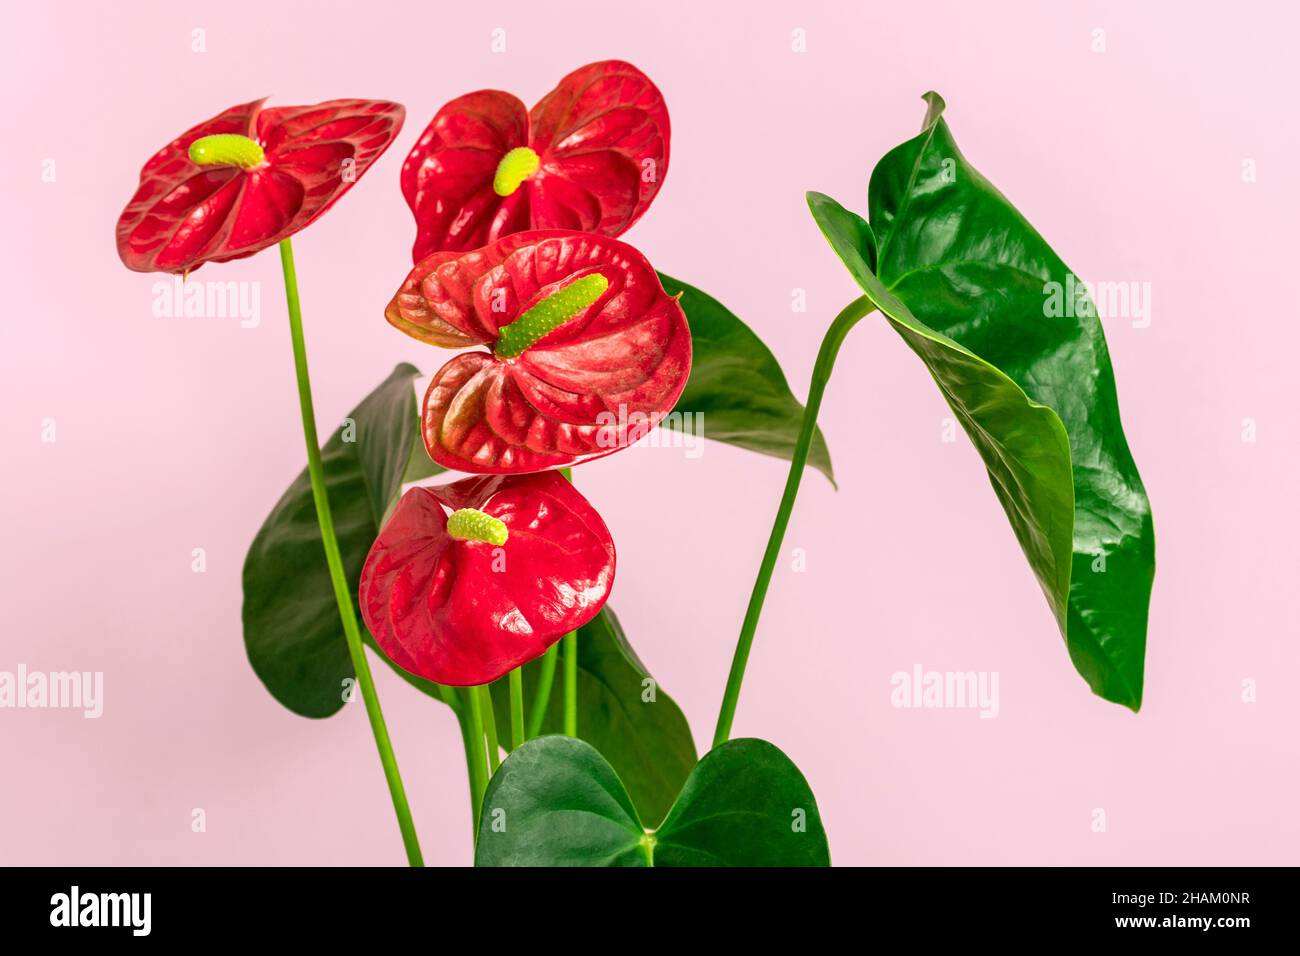 House plant Anthurium in white flowerpot isolated on white table and pink background Anthurium is heart - shaped flower Flamingo flowers or Anthurium Stock Photo